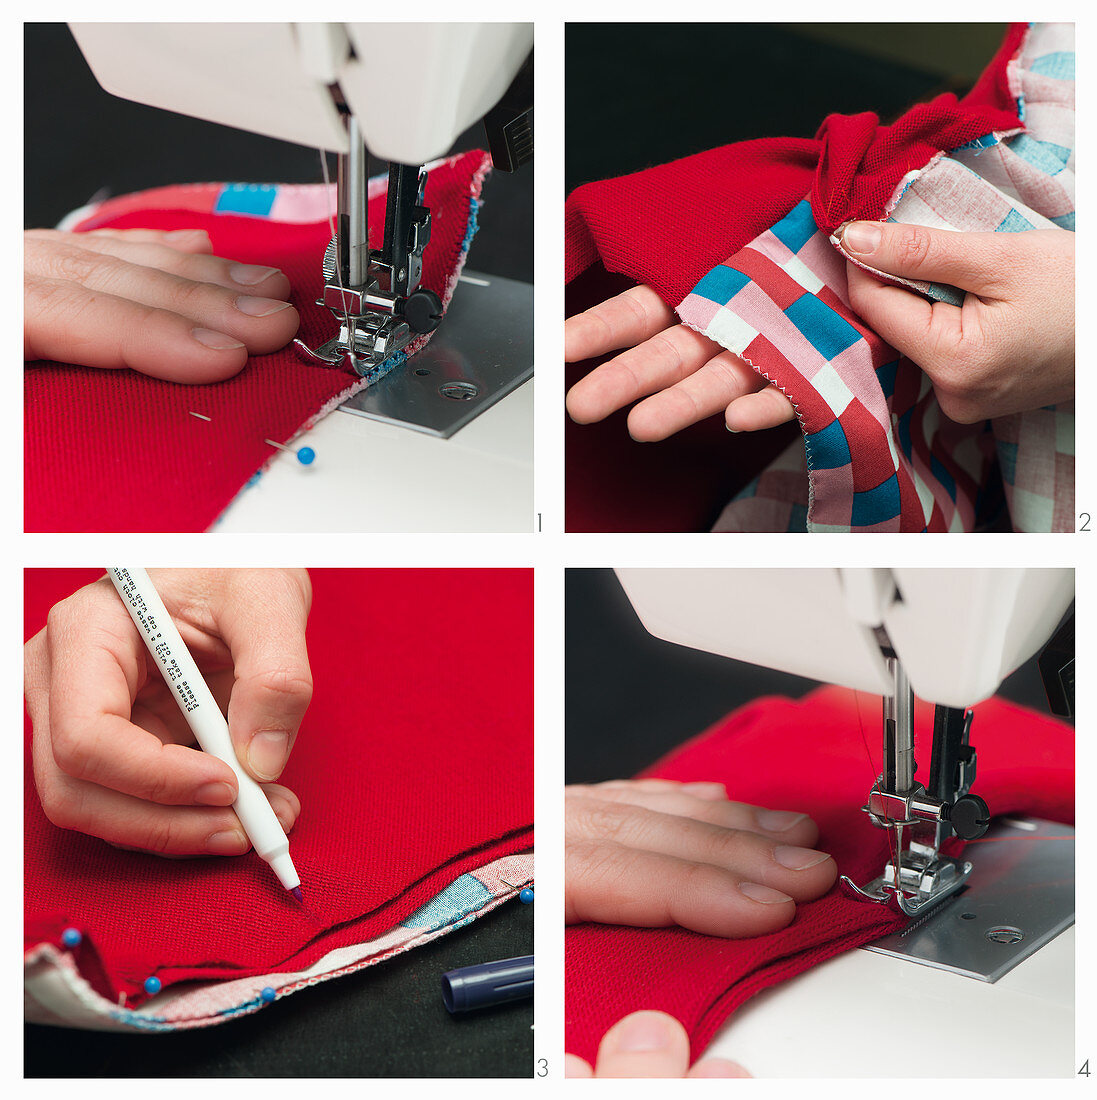 A loop scarf being sewn by hand